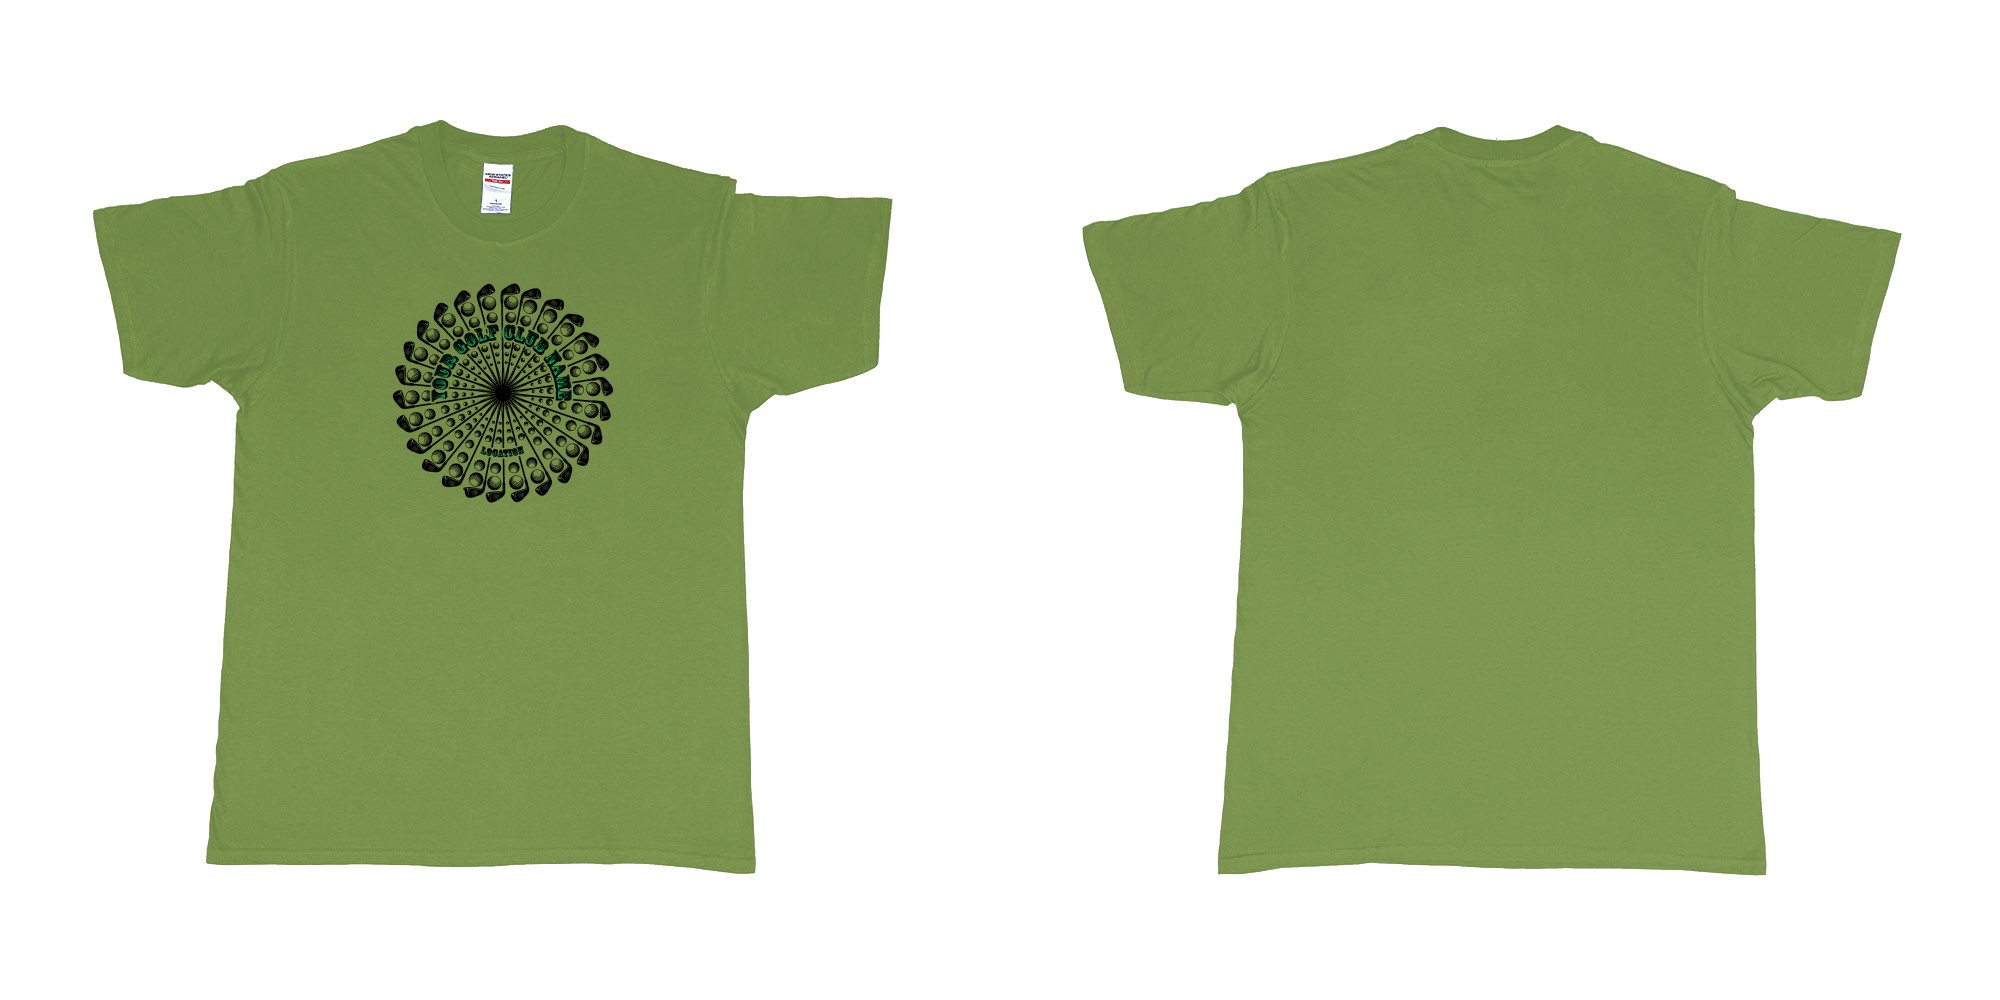 Custom tshirt design golf clubs balls mandala cutoms club name location in fabric color military-green choice your own text made in Bali by The Pirate Way